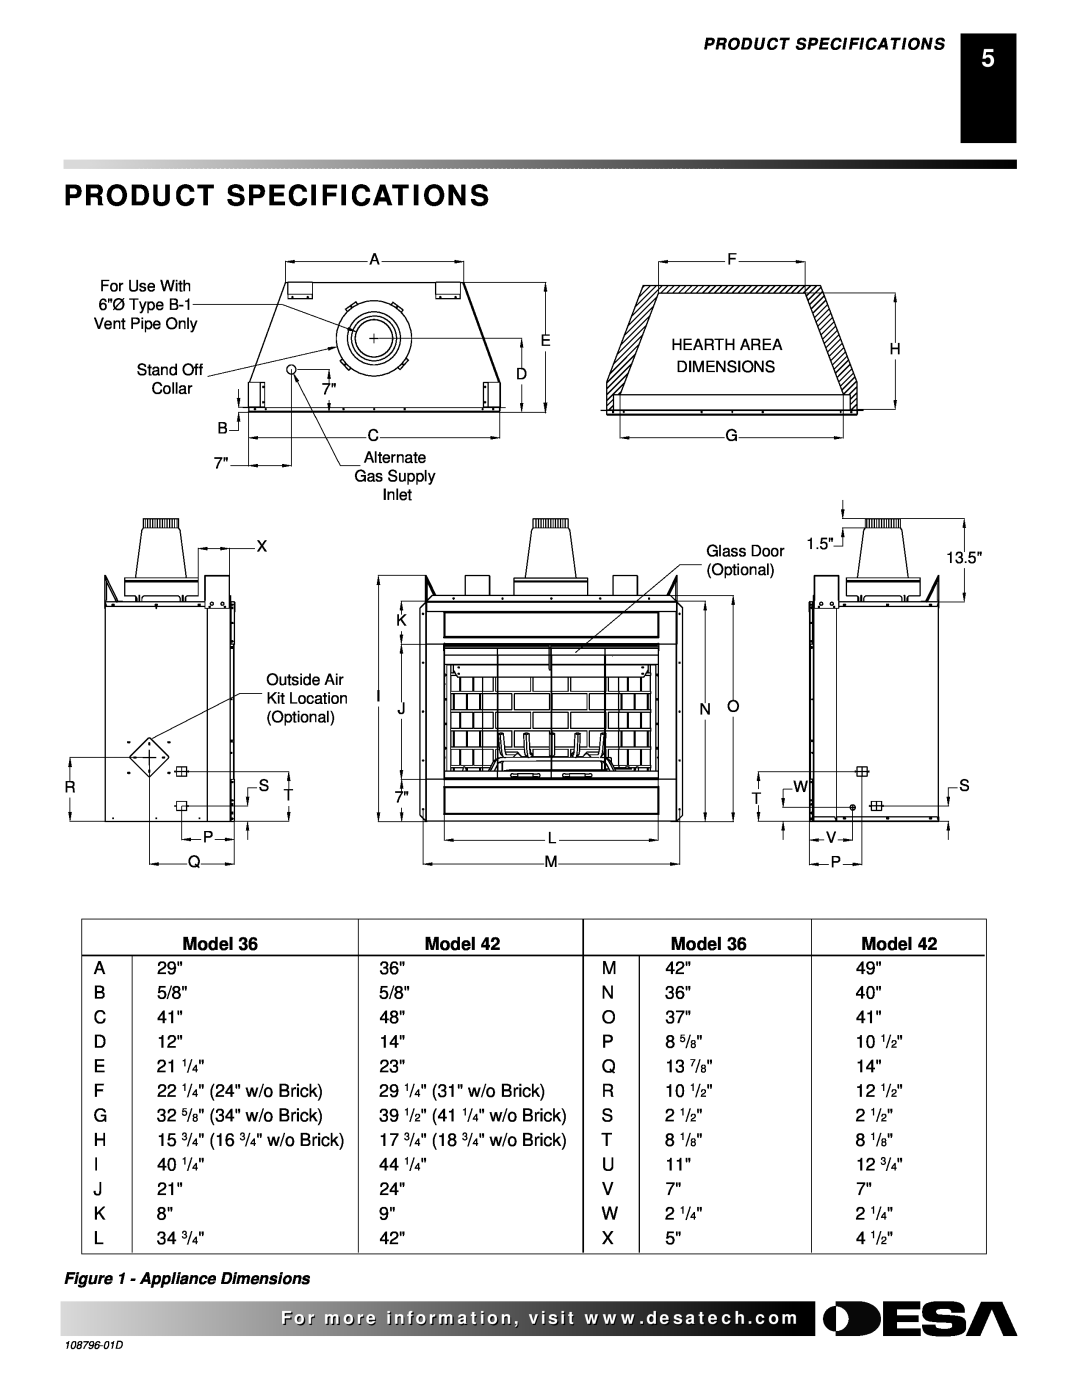 Desa M36E, M42E, VM36E, VM42E, H) AND VM42E(B installation manual Product Specifications, Model 